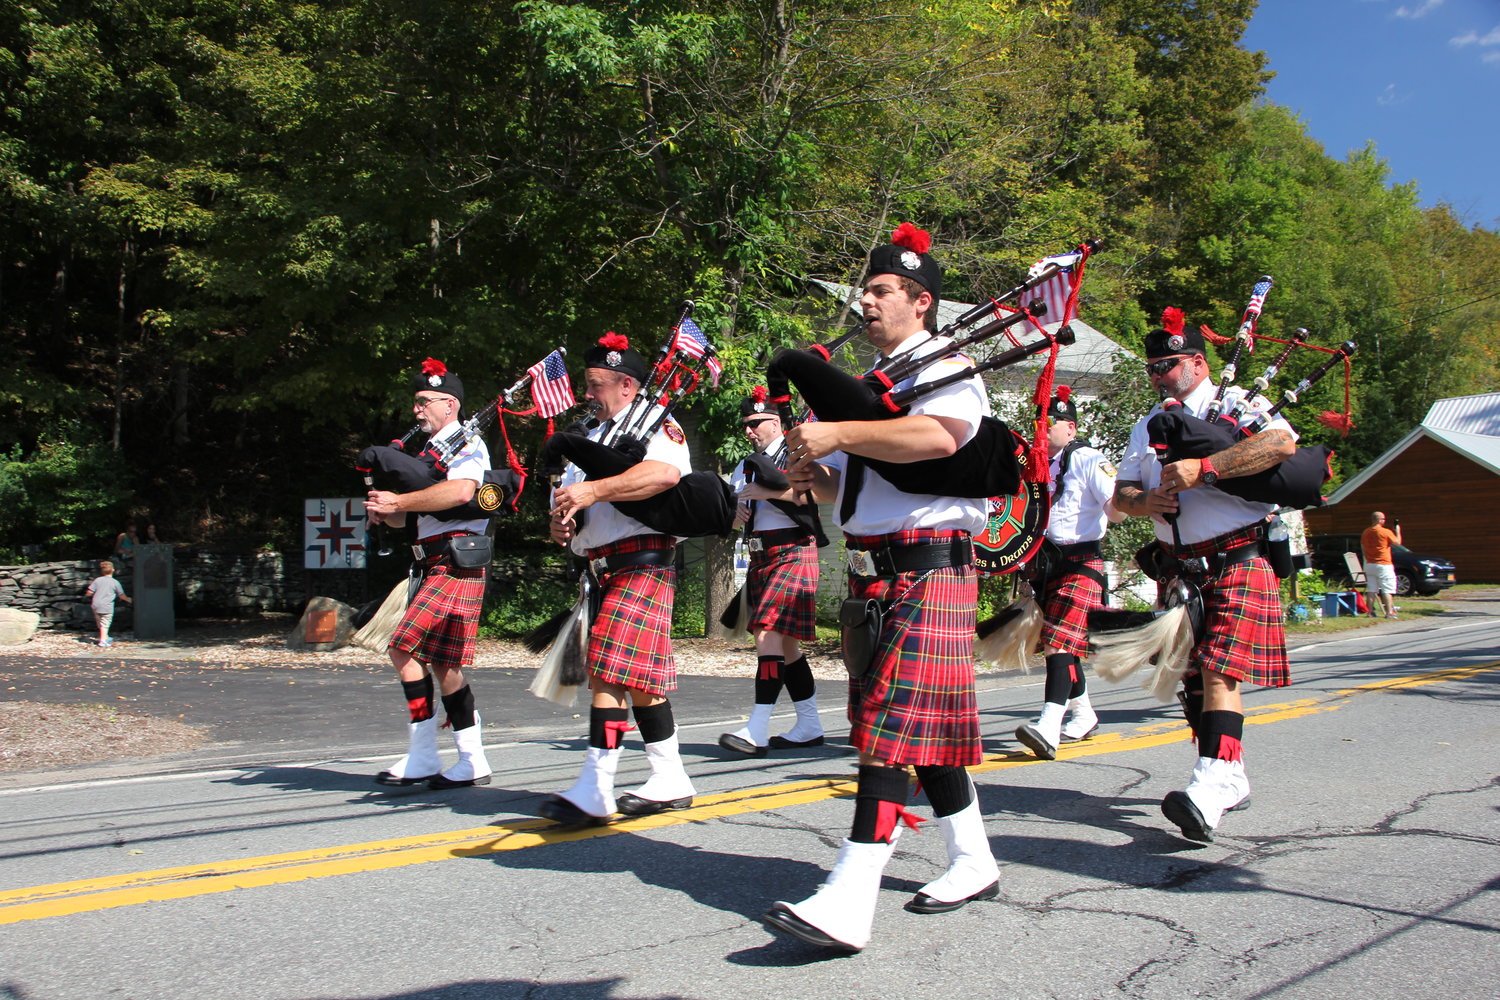 The Orange County Firefighters Pipes and Drums were a smart looking group at the parade.